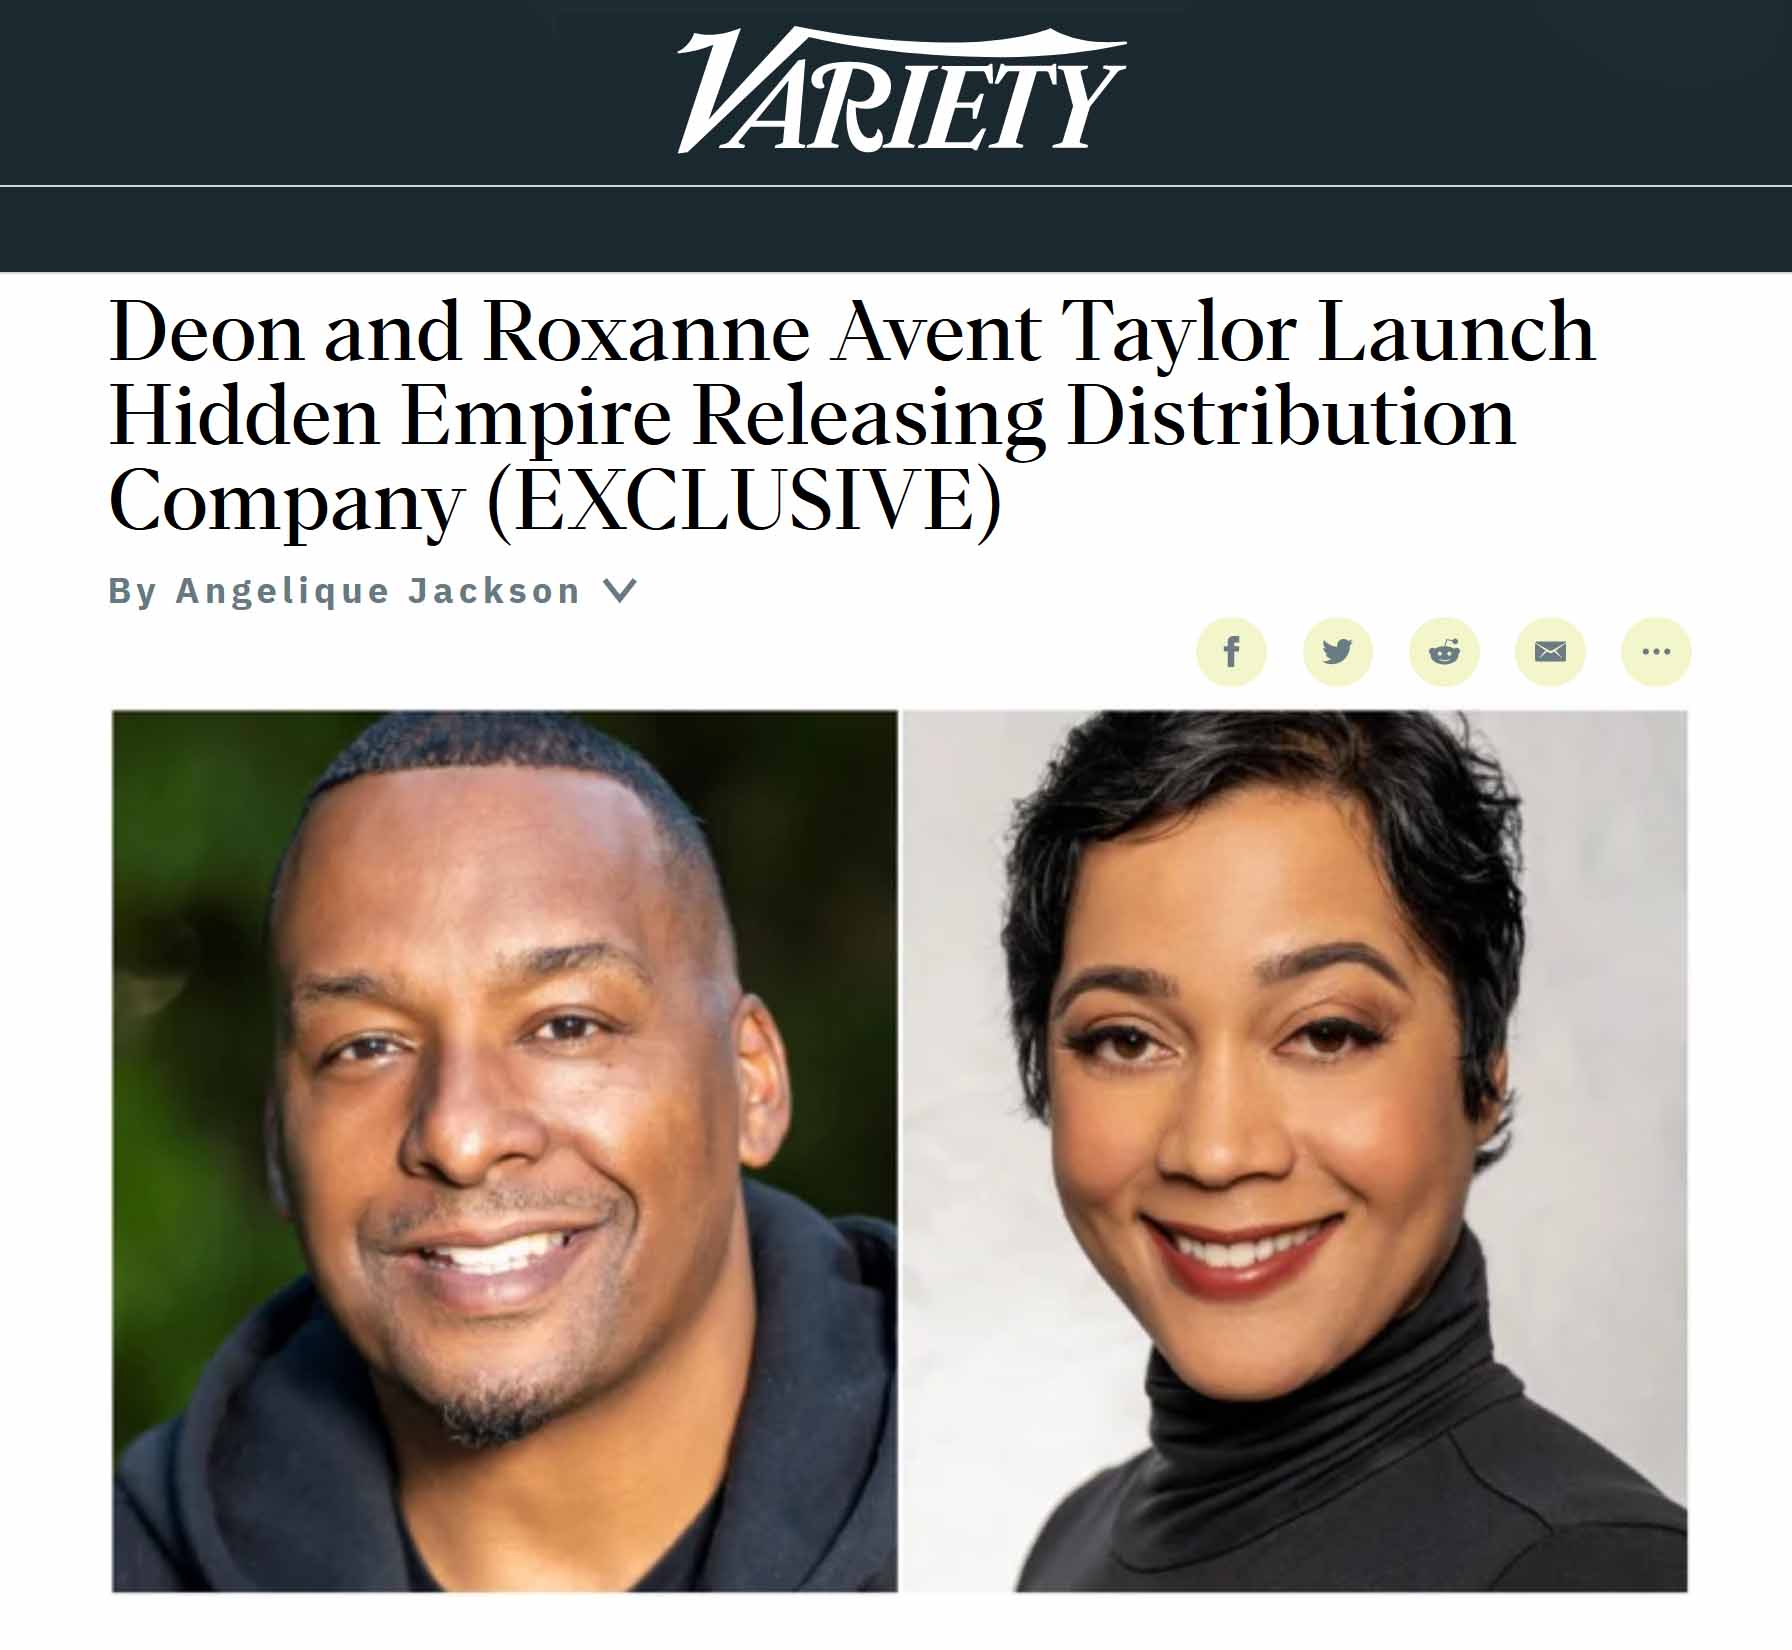 Deon and Roxanne Avent Taylor Launch Hidden Empire Releasing Distribution Company